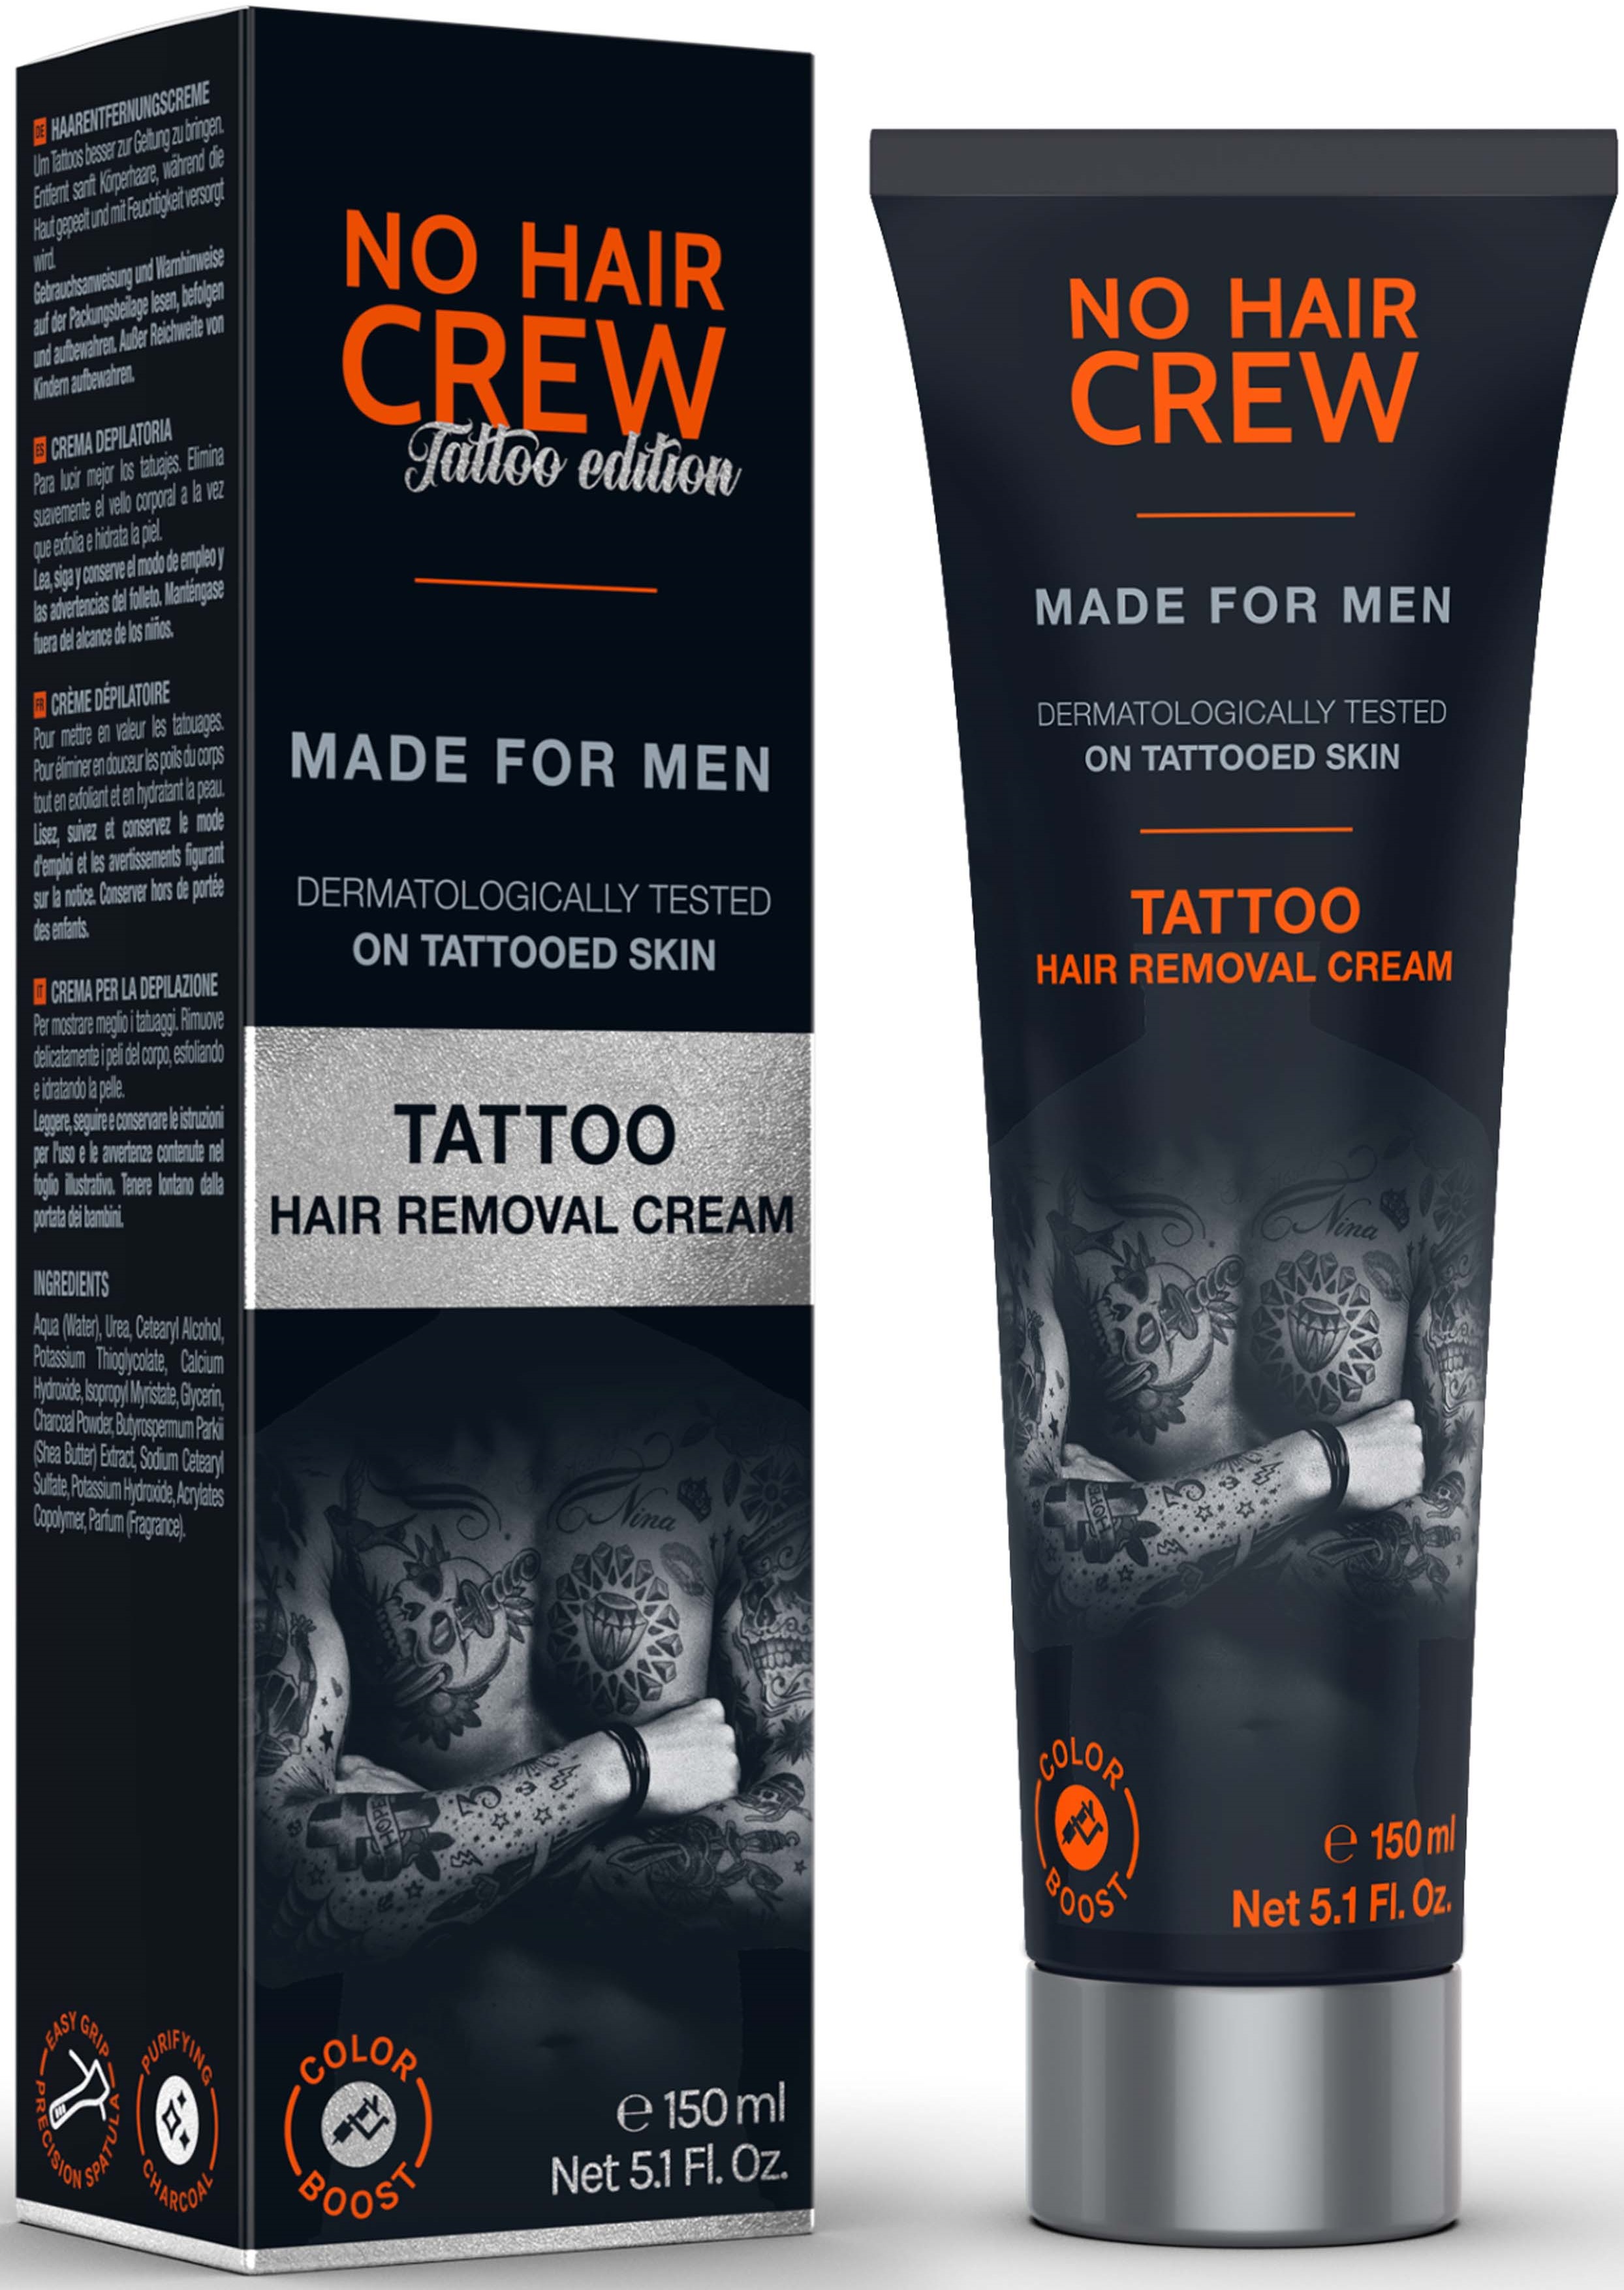 Does Tattoo Removal Cream Work?